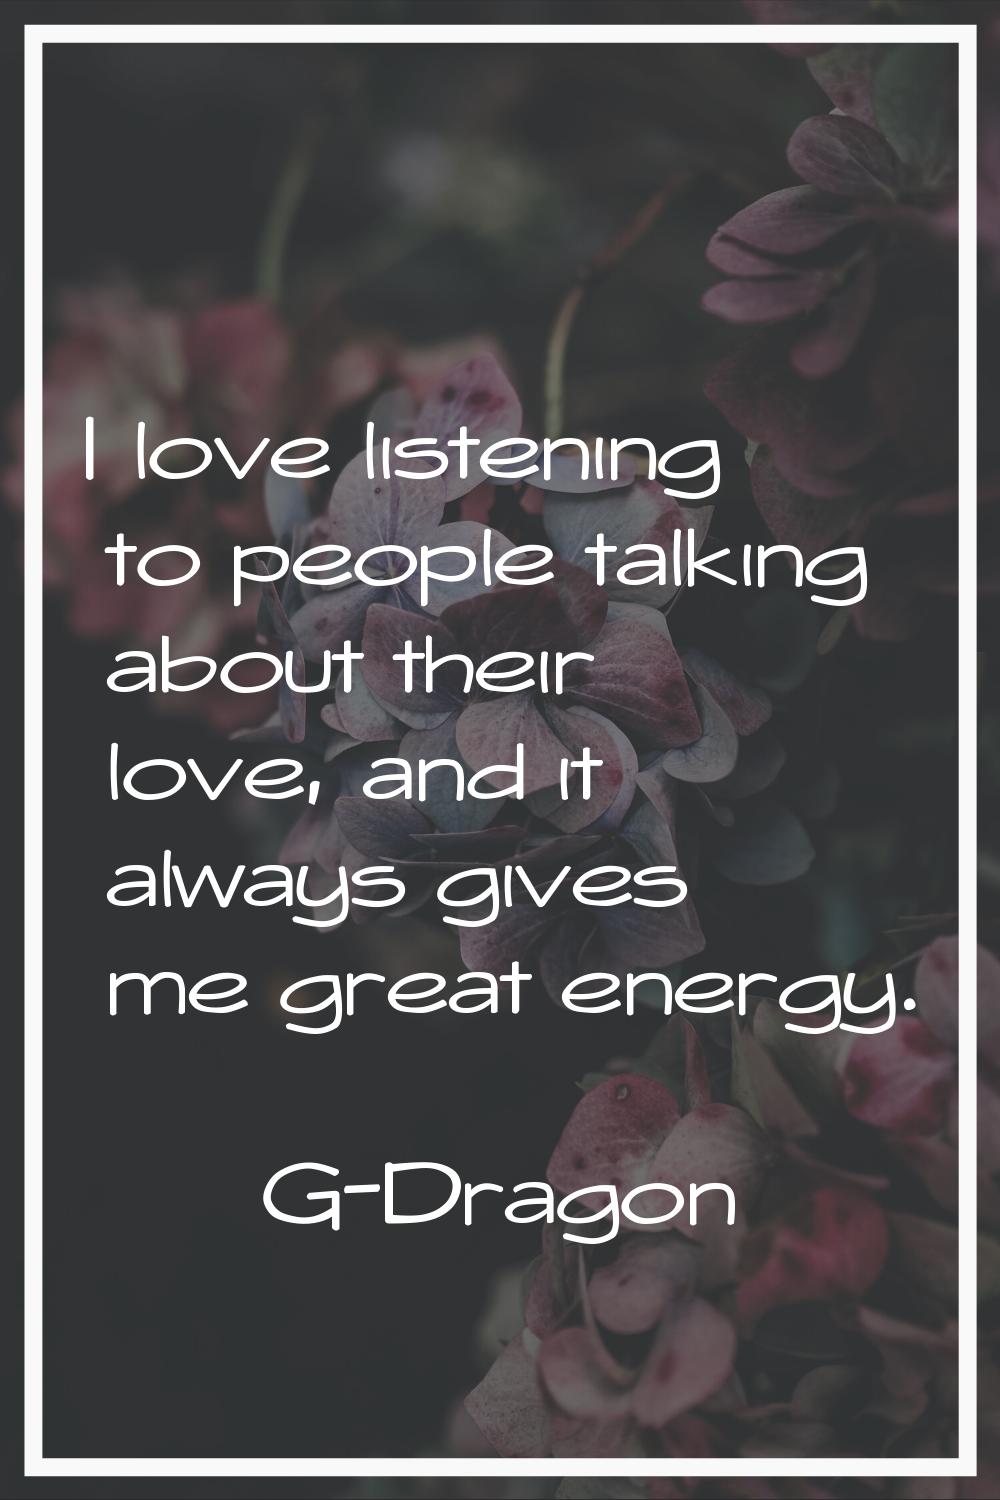 I love listening to people talking about their love, and it always gives me great energy.